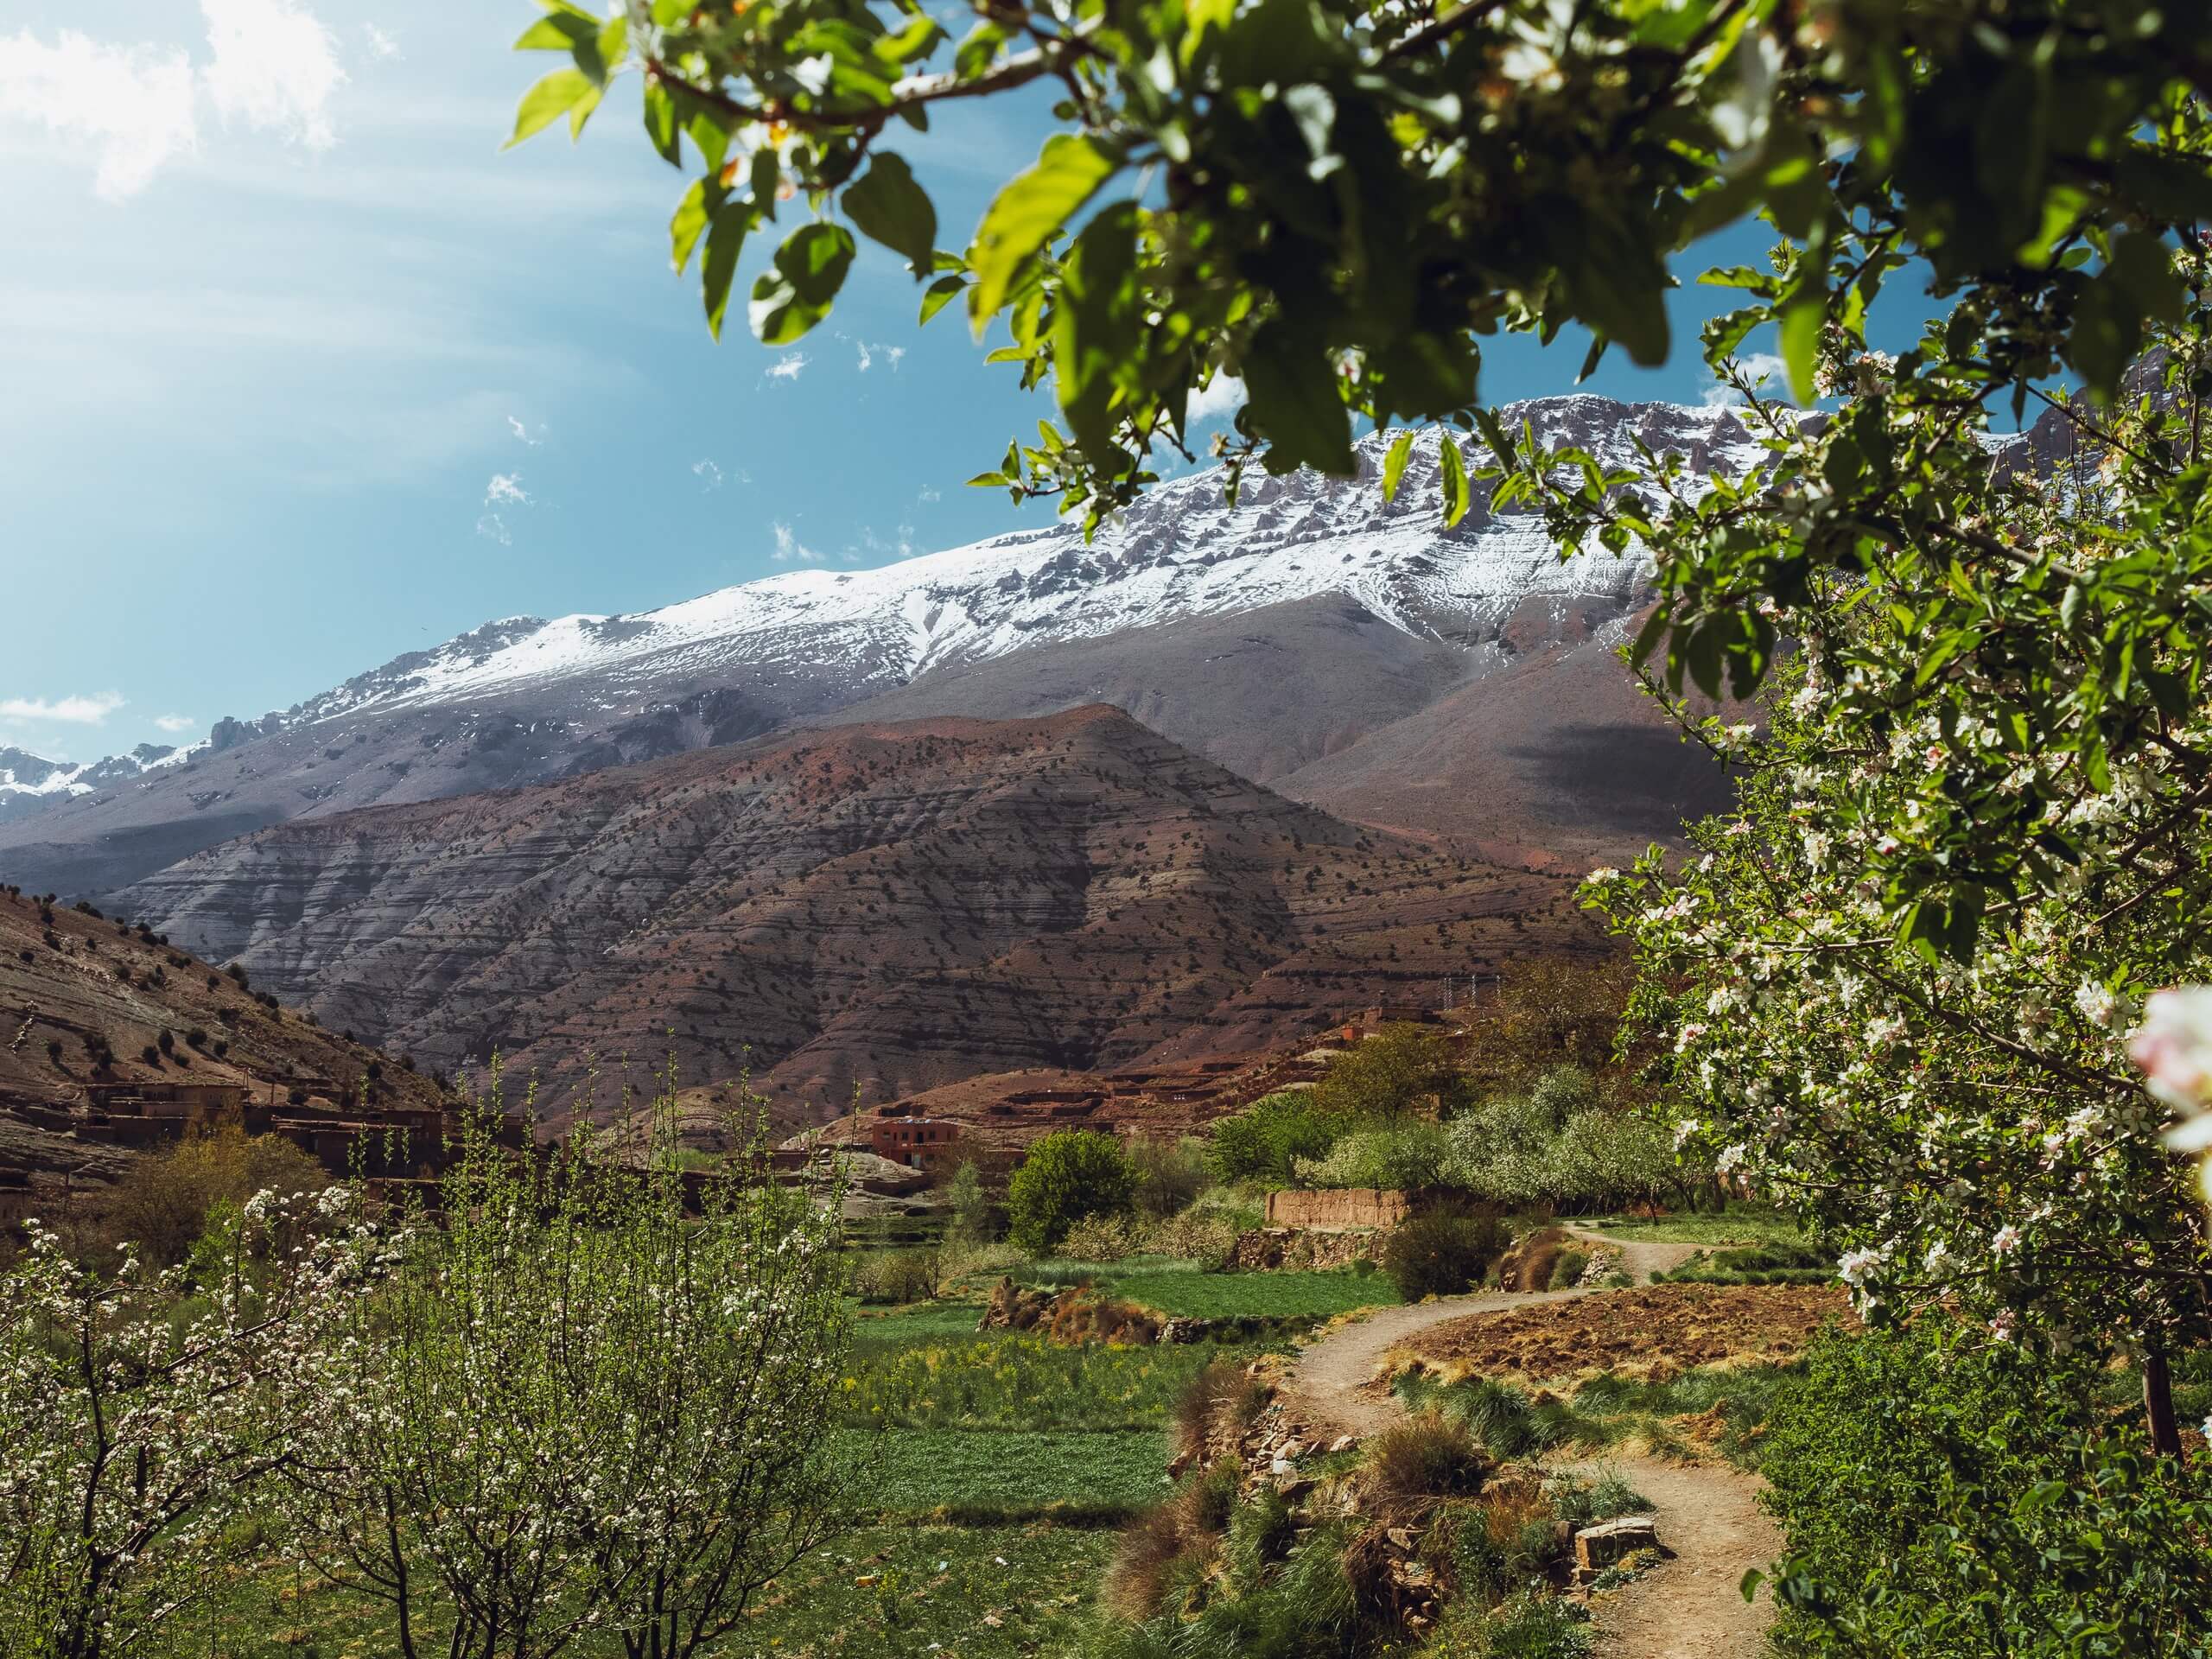 Valley in Morocco